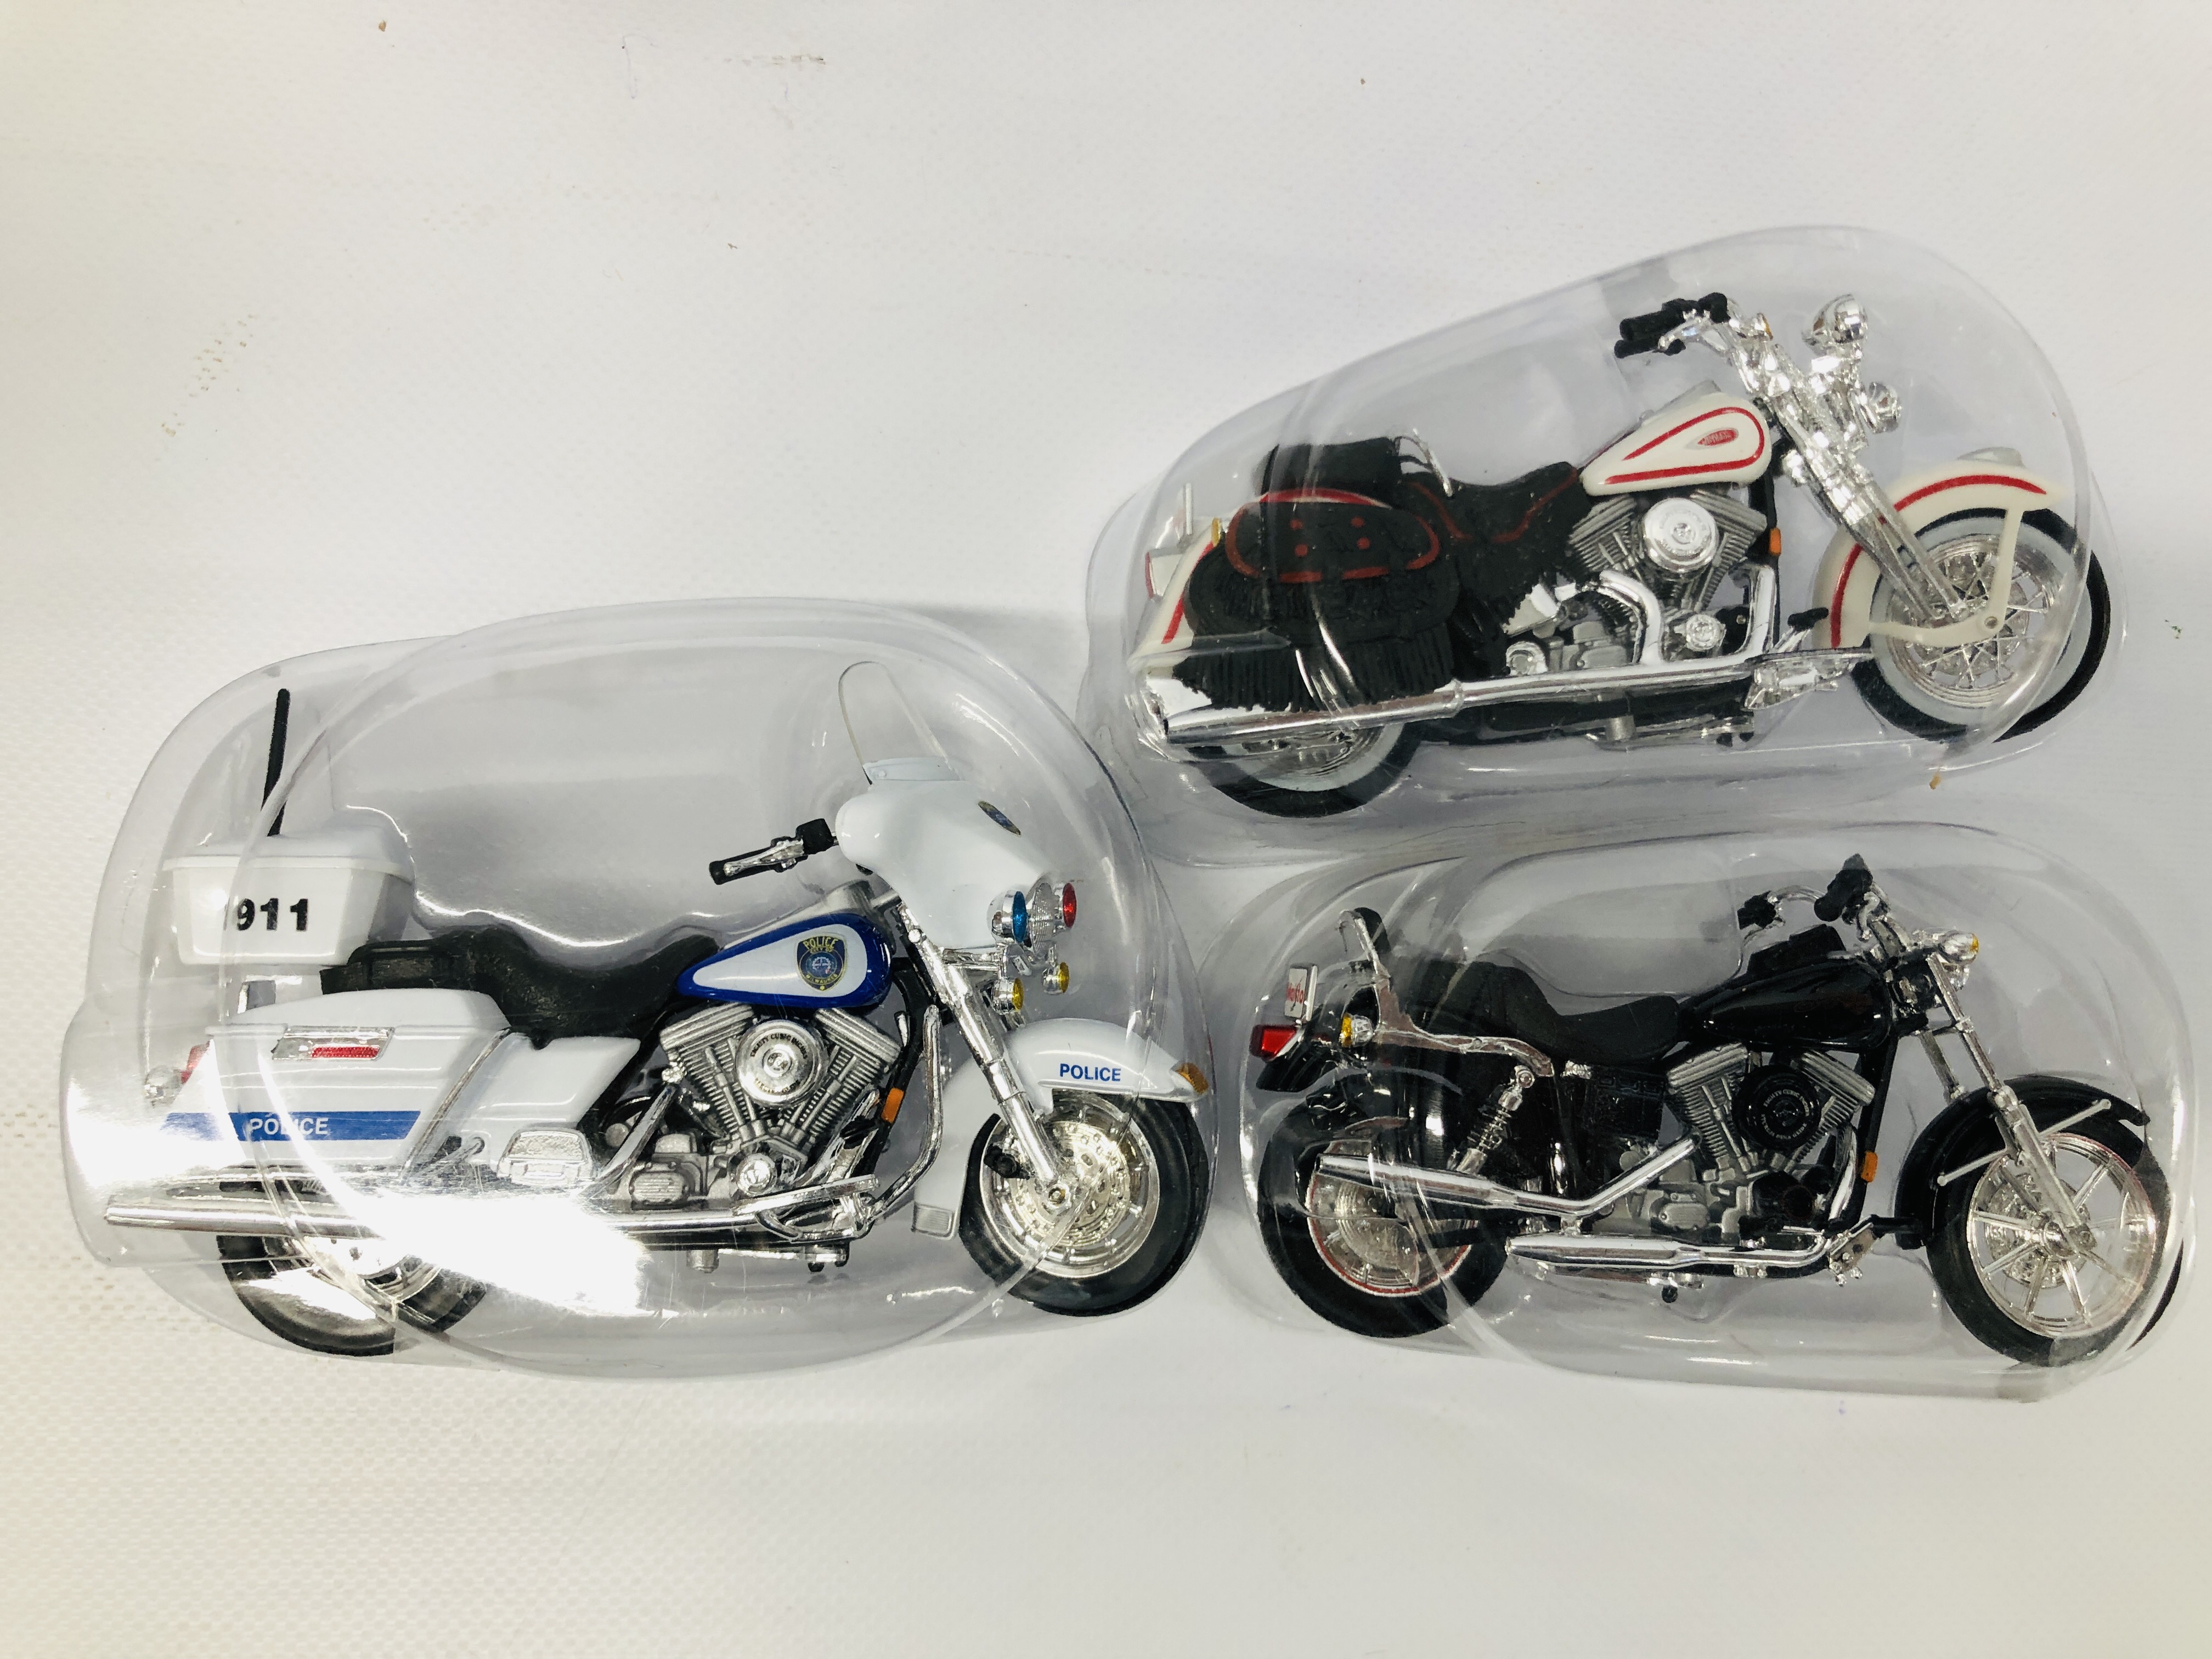 A COMPLETE SET OF 24 HARLEY DAVIDSON MODEL MOTORCYCLES "THE LEGENDS COLLECTION" - Image 9 of 9